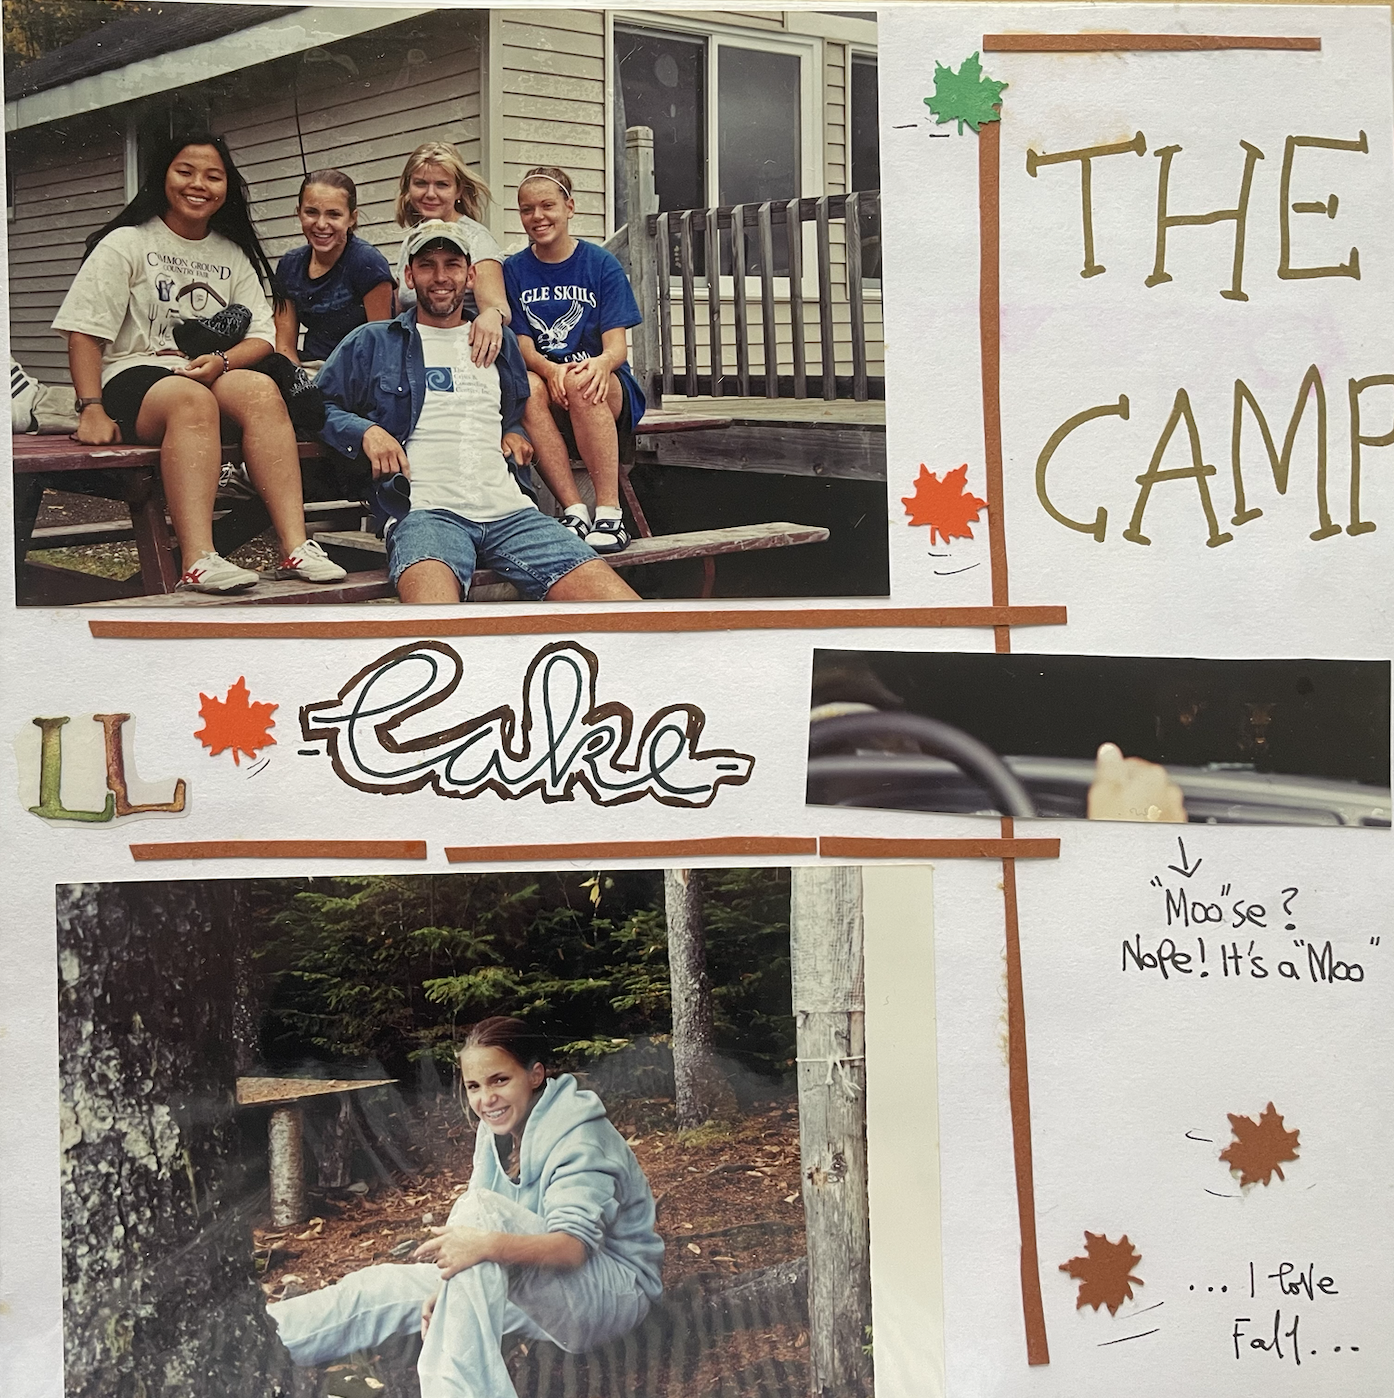 Scrapbook Page Featuring Photos Of People Smiling And Posing At A Lake House